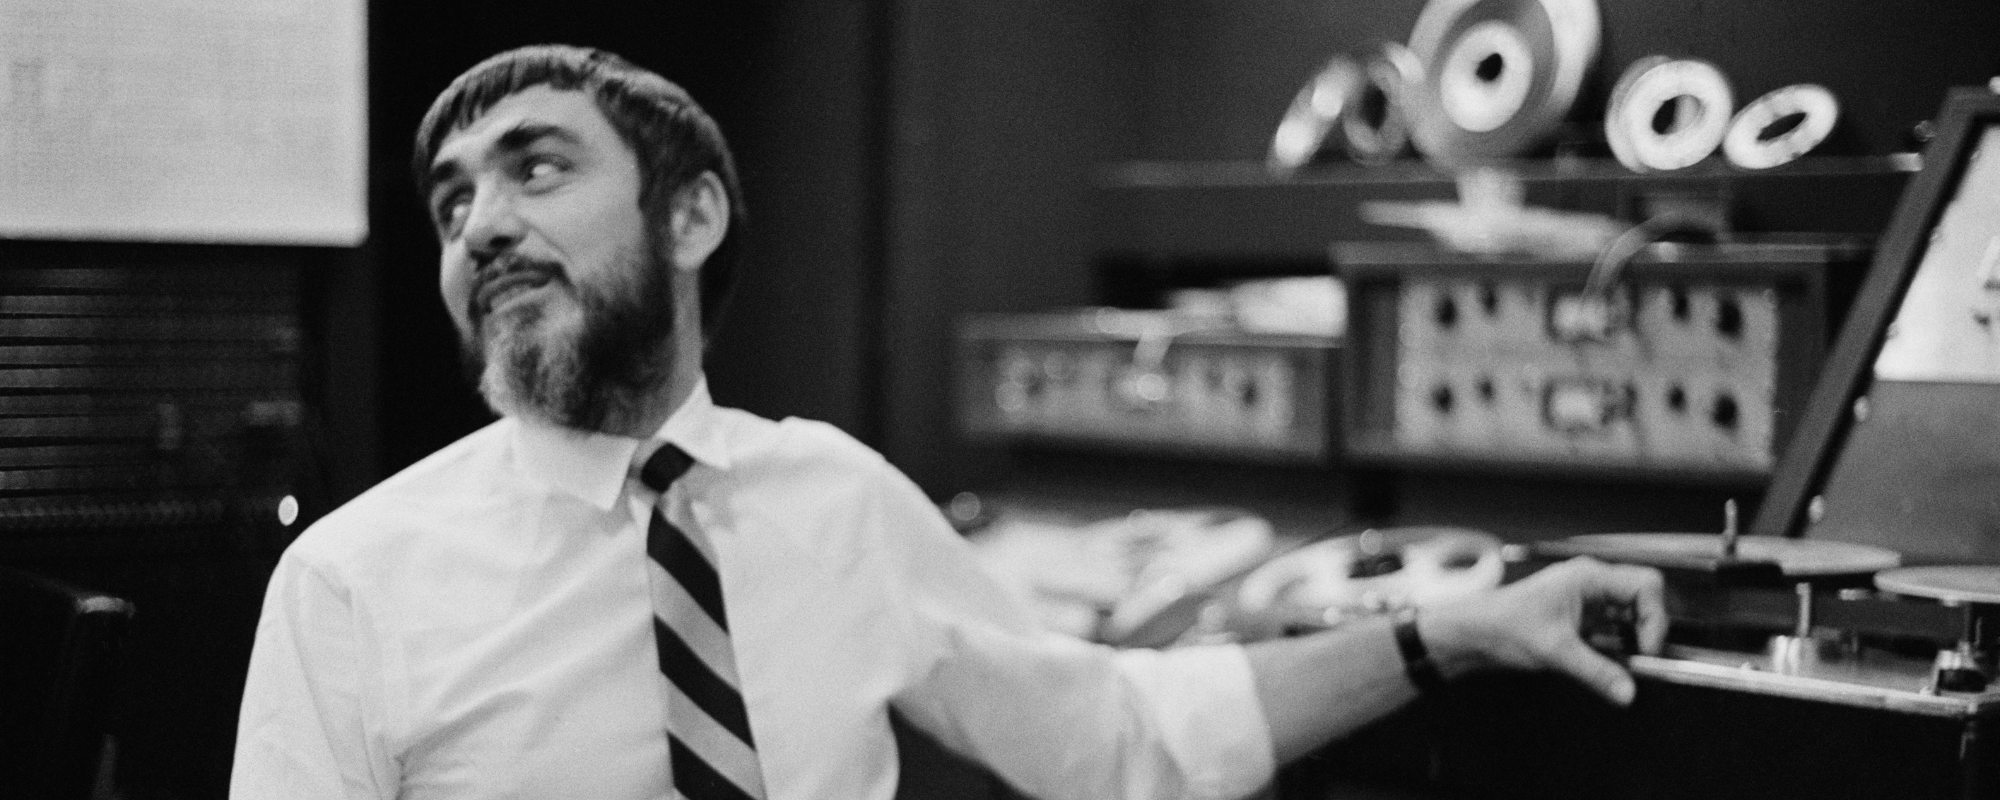 5 Fascinating Facts About Tom Dowd, Who Produced the Allmans, Clapton, Skynyrd, and the Atomic Bomb (Yes, as in ‘The’ Bomb)